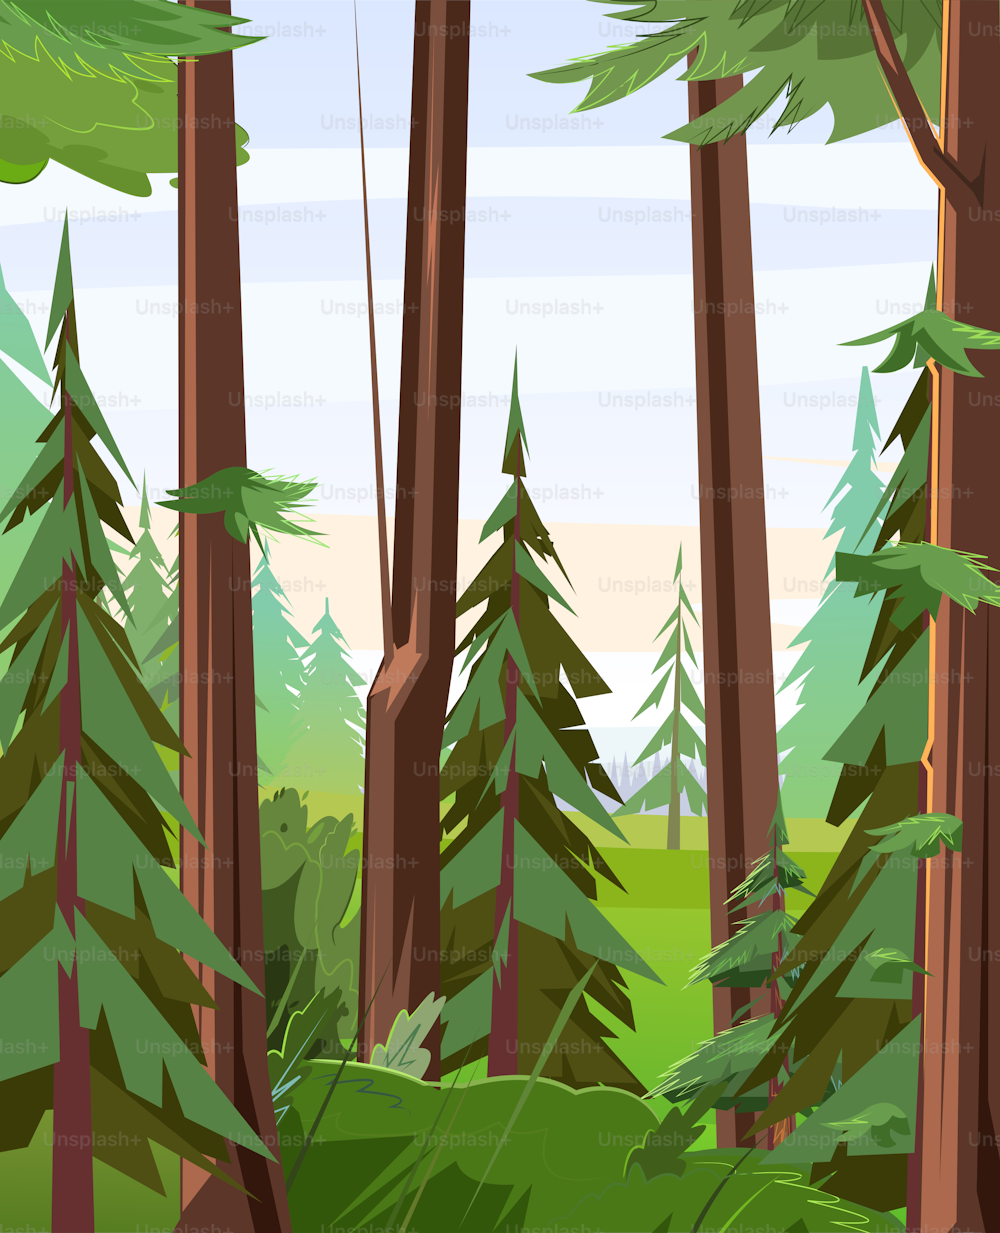 Thickets. Tree trunks. Young and adult christmas trees. Beautiful pine forest. Wild floral landscape. Illustration in cartoon style flat design. Vector.